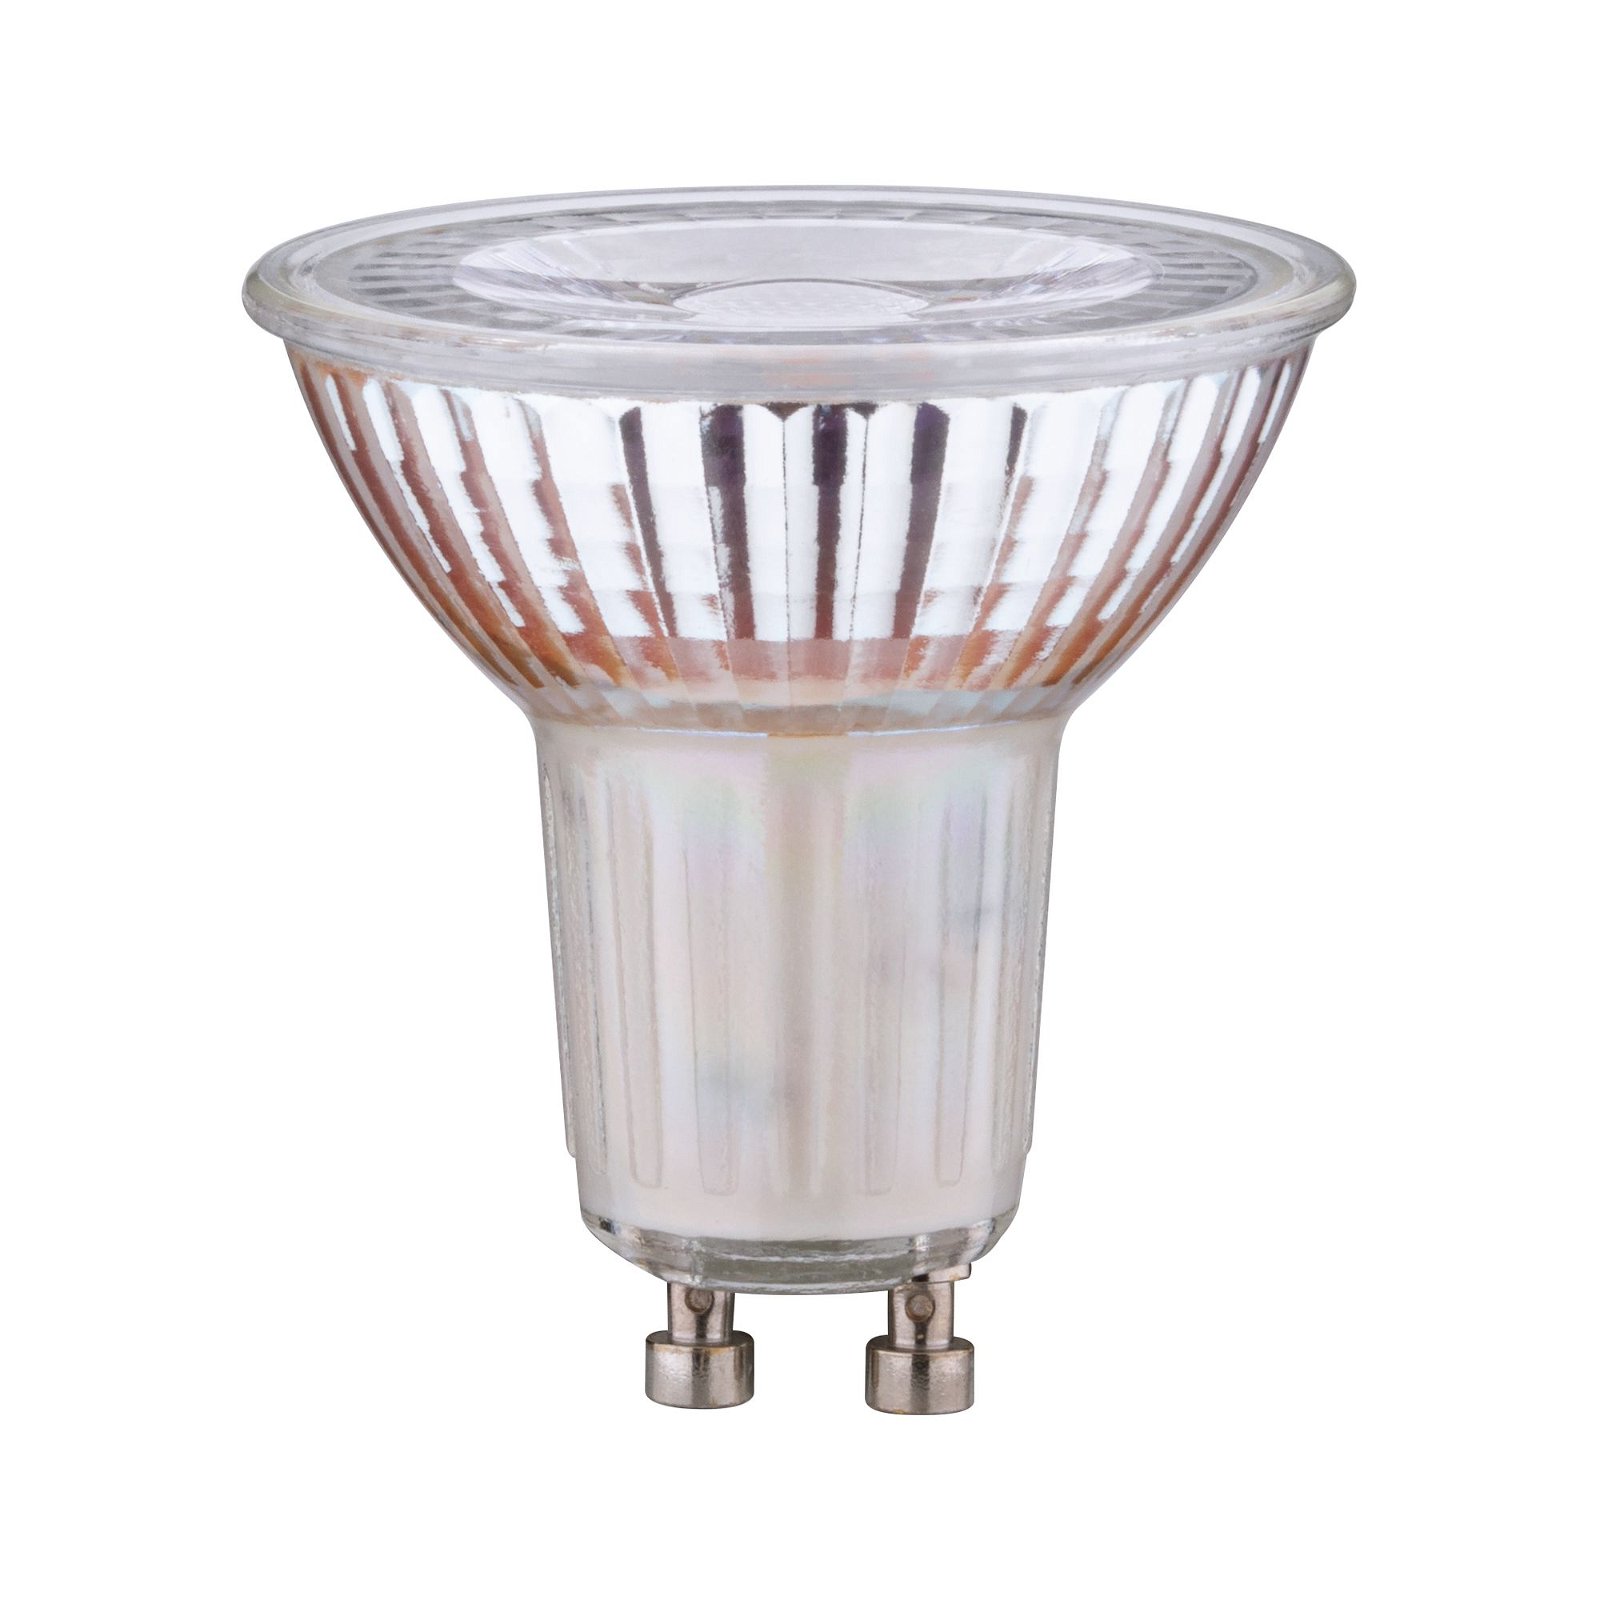 LED glass reflector 5.7W GU10 warm white dimmable